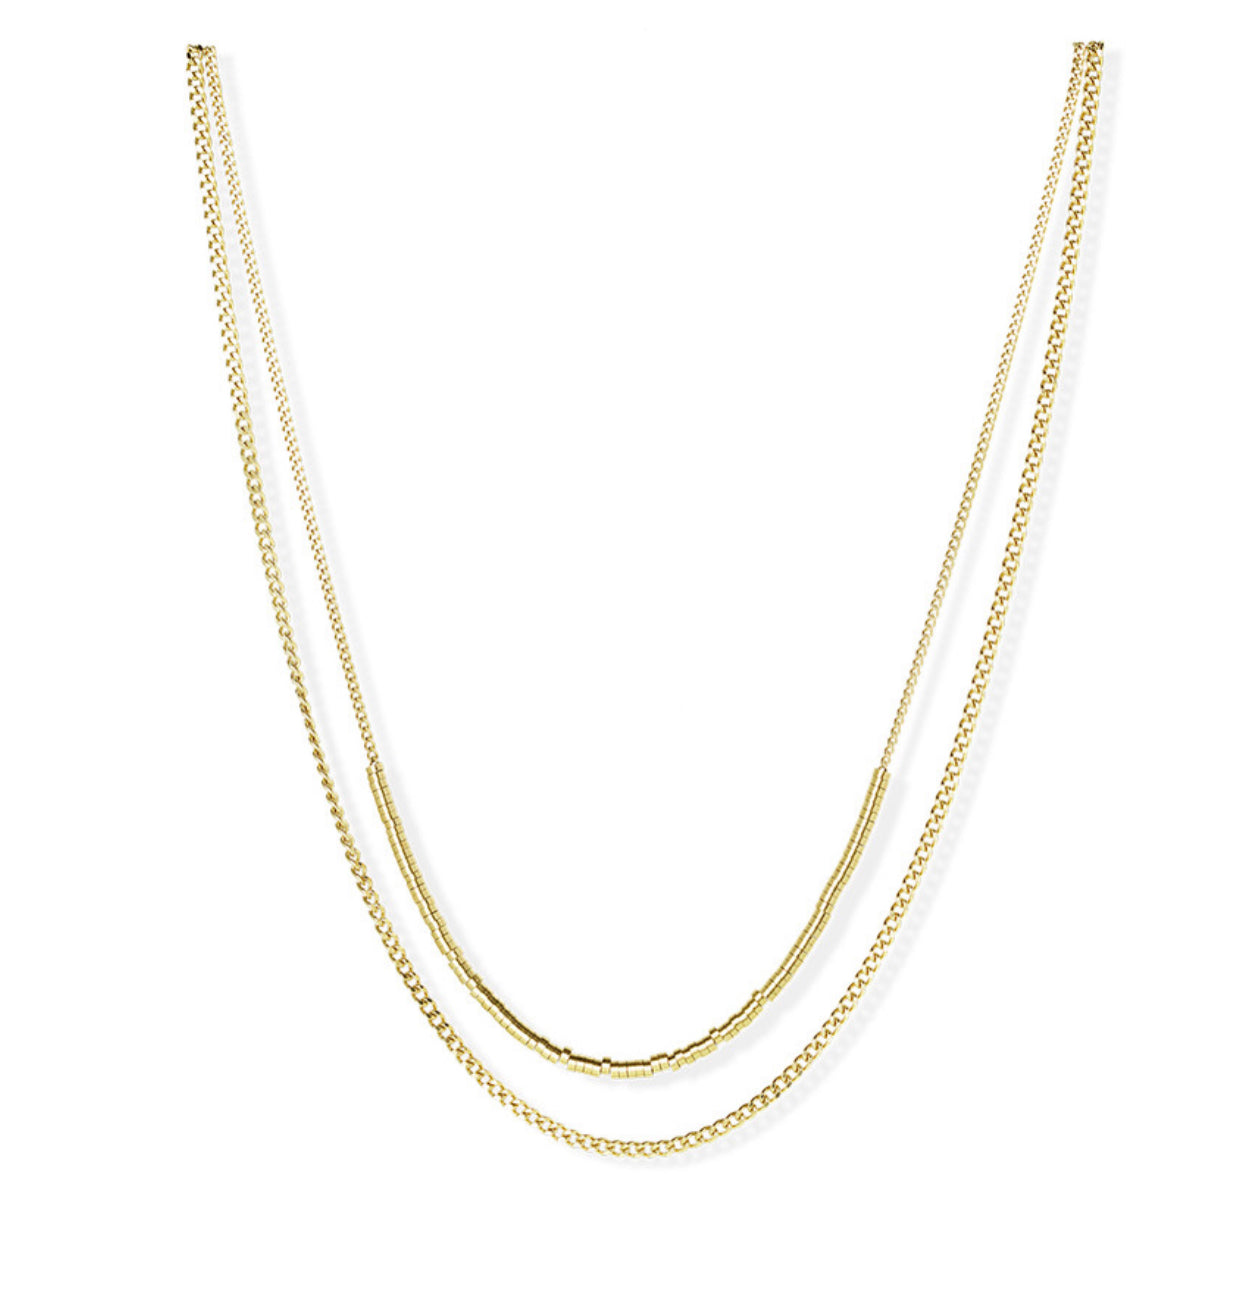 FAB AMORE LAYERED NECKLACE